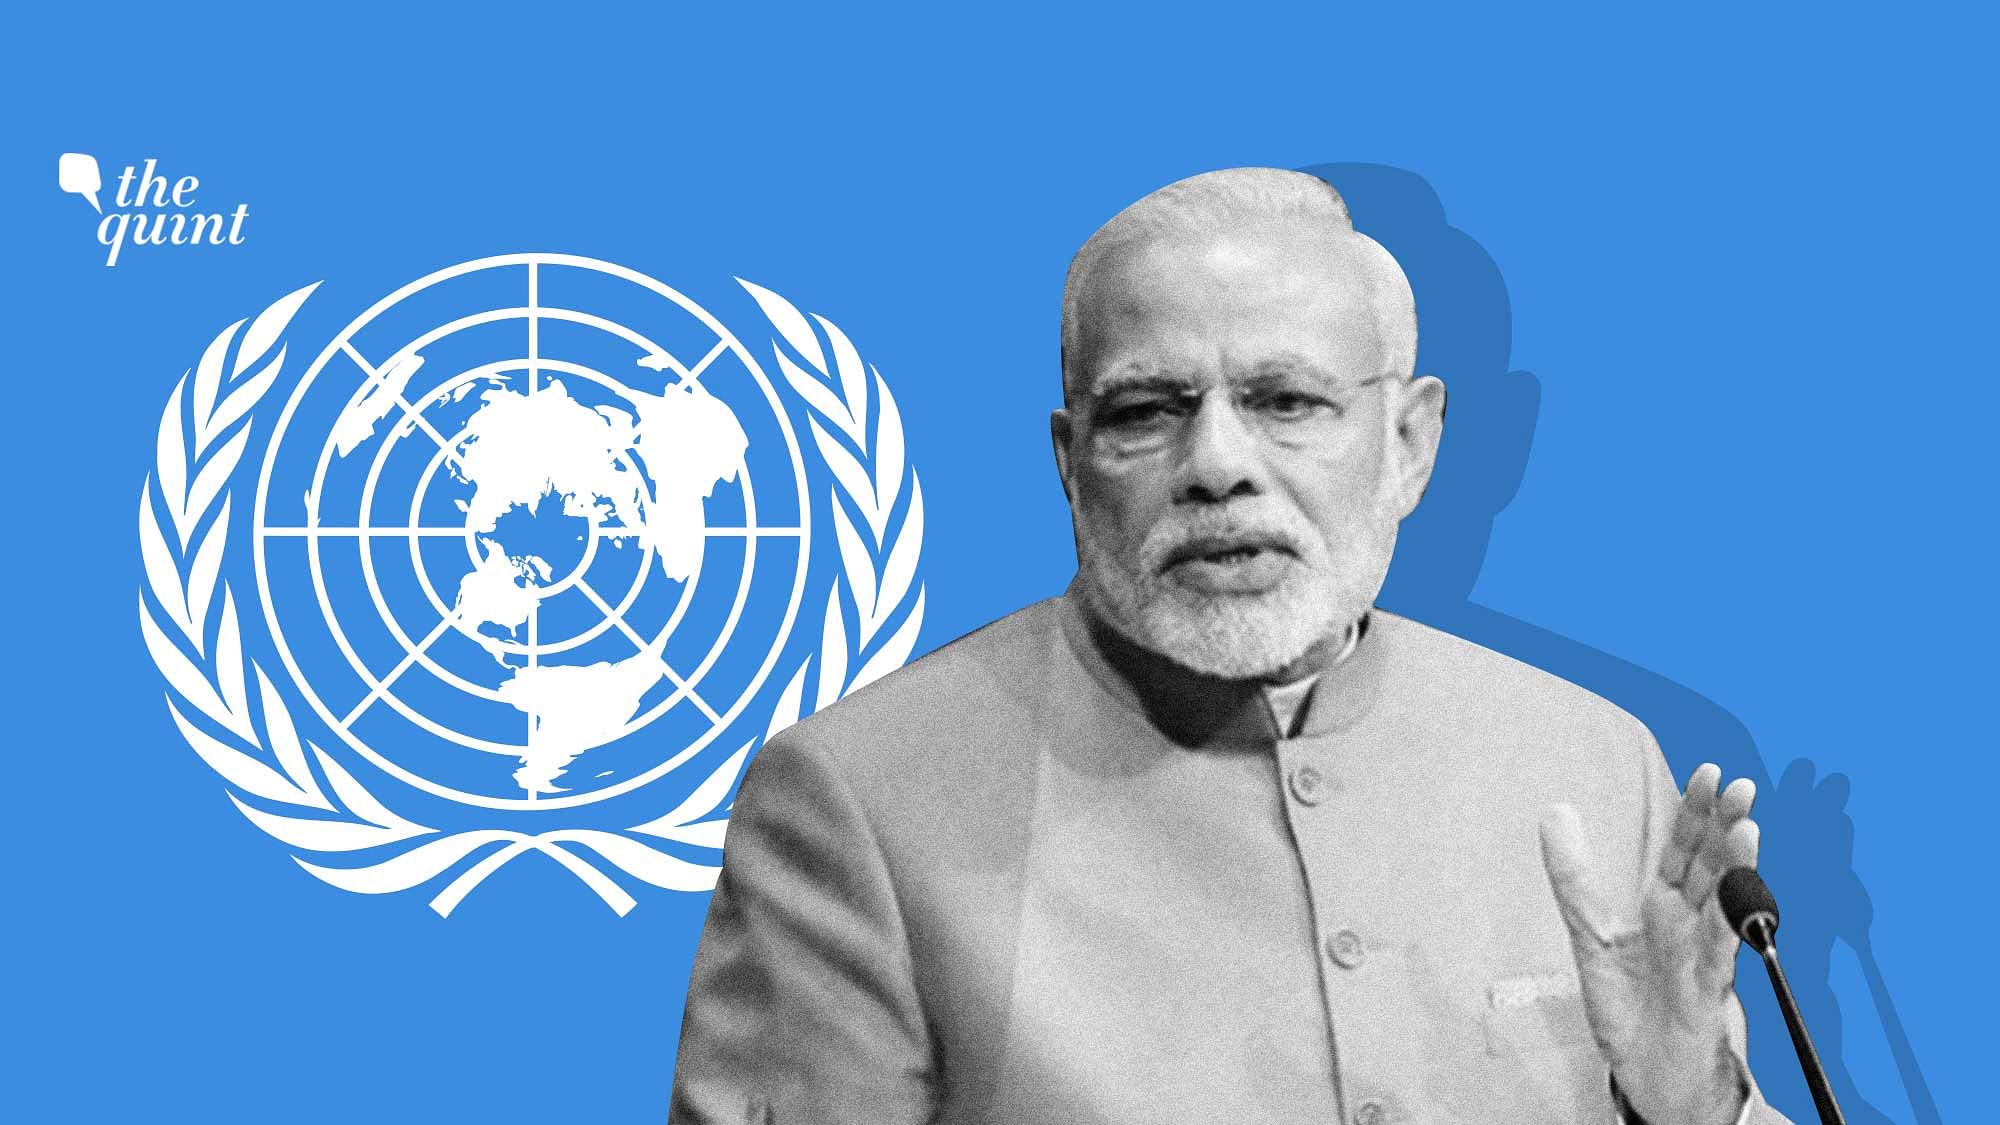 PM Modi spoke of achievements, laid out complaints and put out promises linked to India’s non-permanent membership of the UNSC next year.&nbsp;